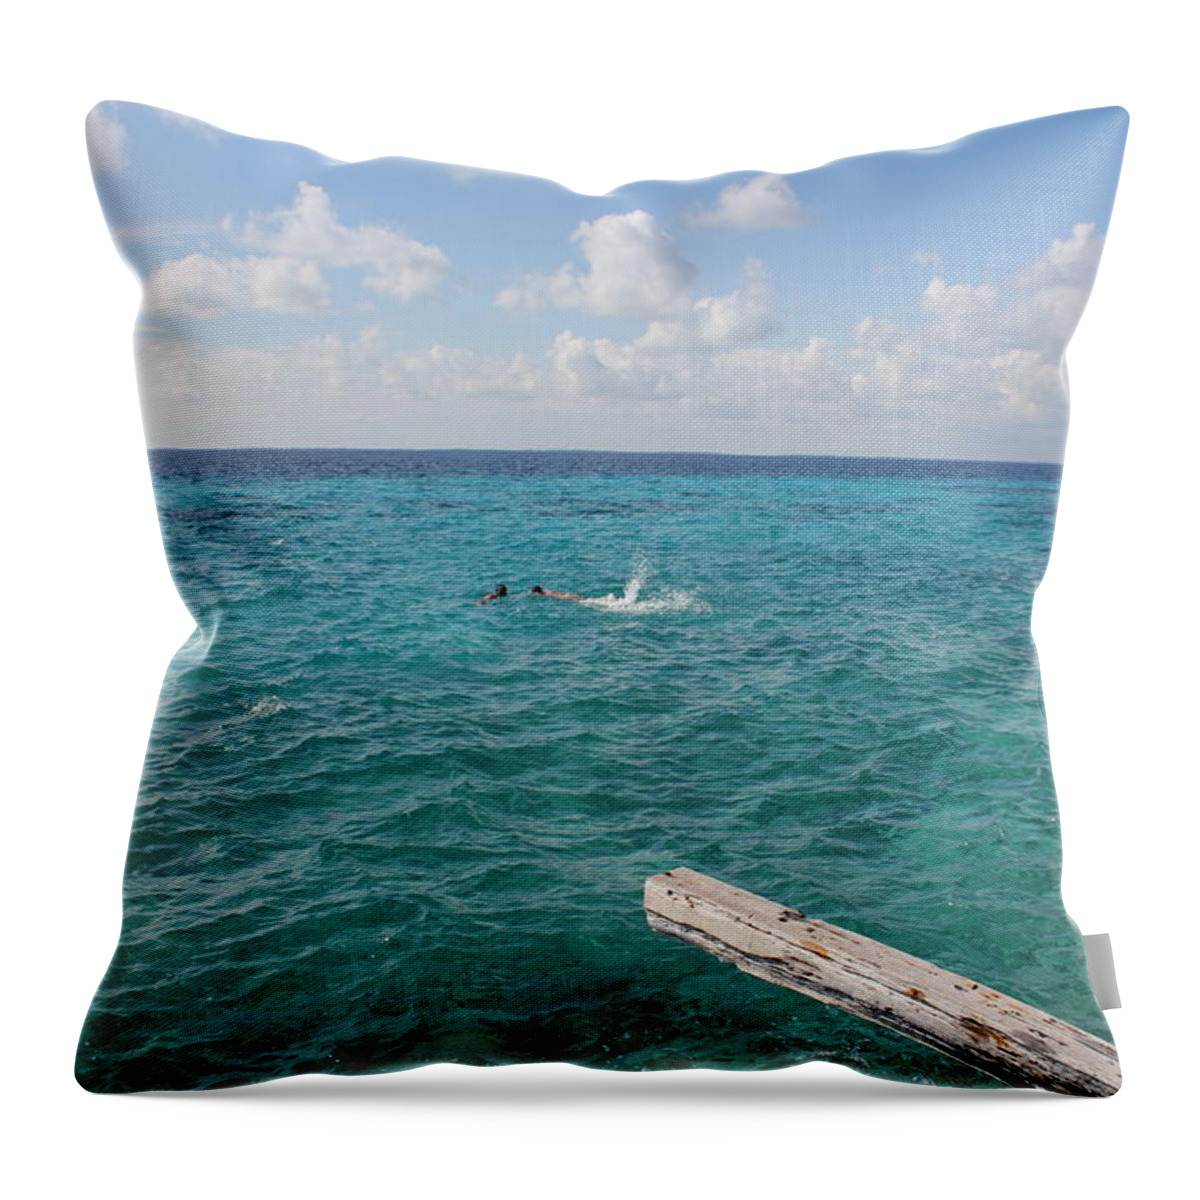 Tropical Vacation Throw Pillow featuring the photograph Snorkeling by Ruth Kamenev